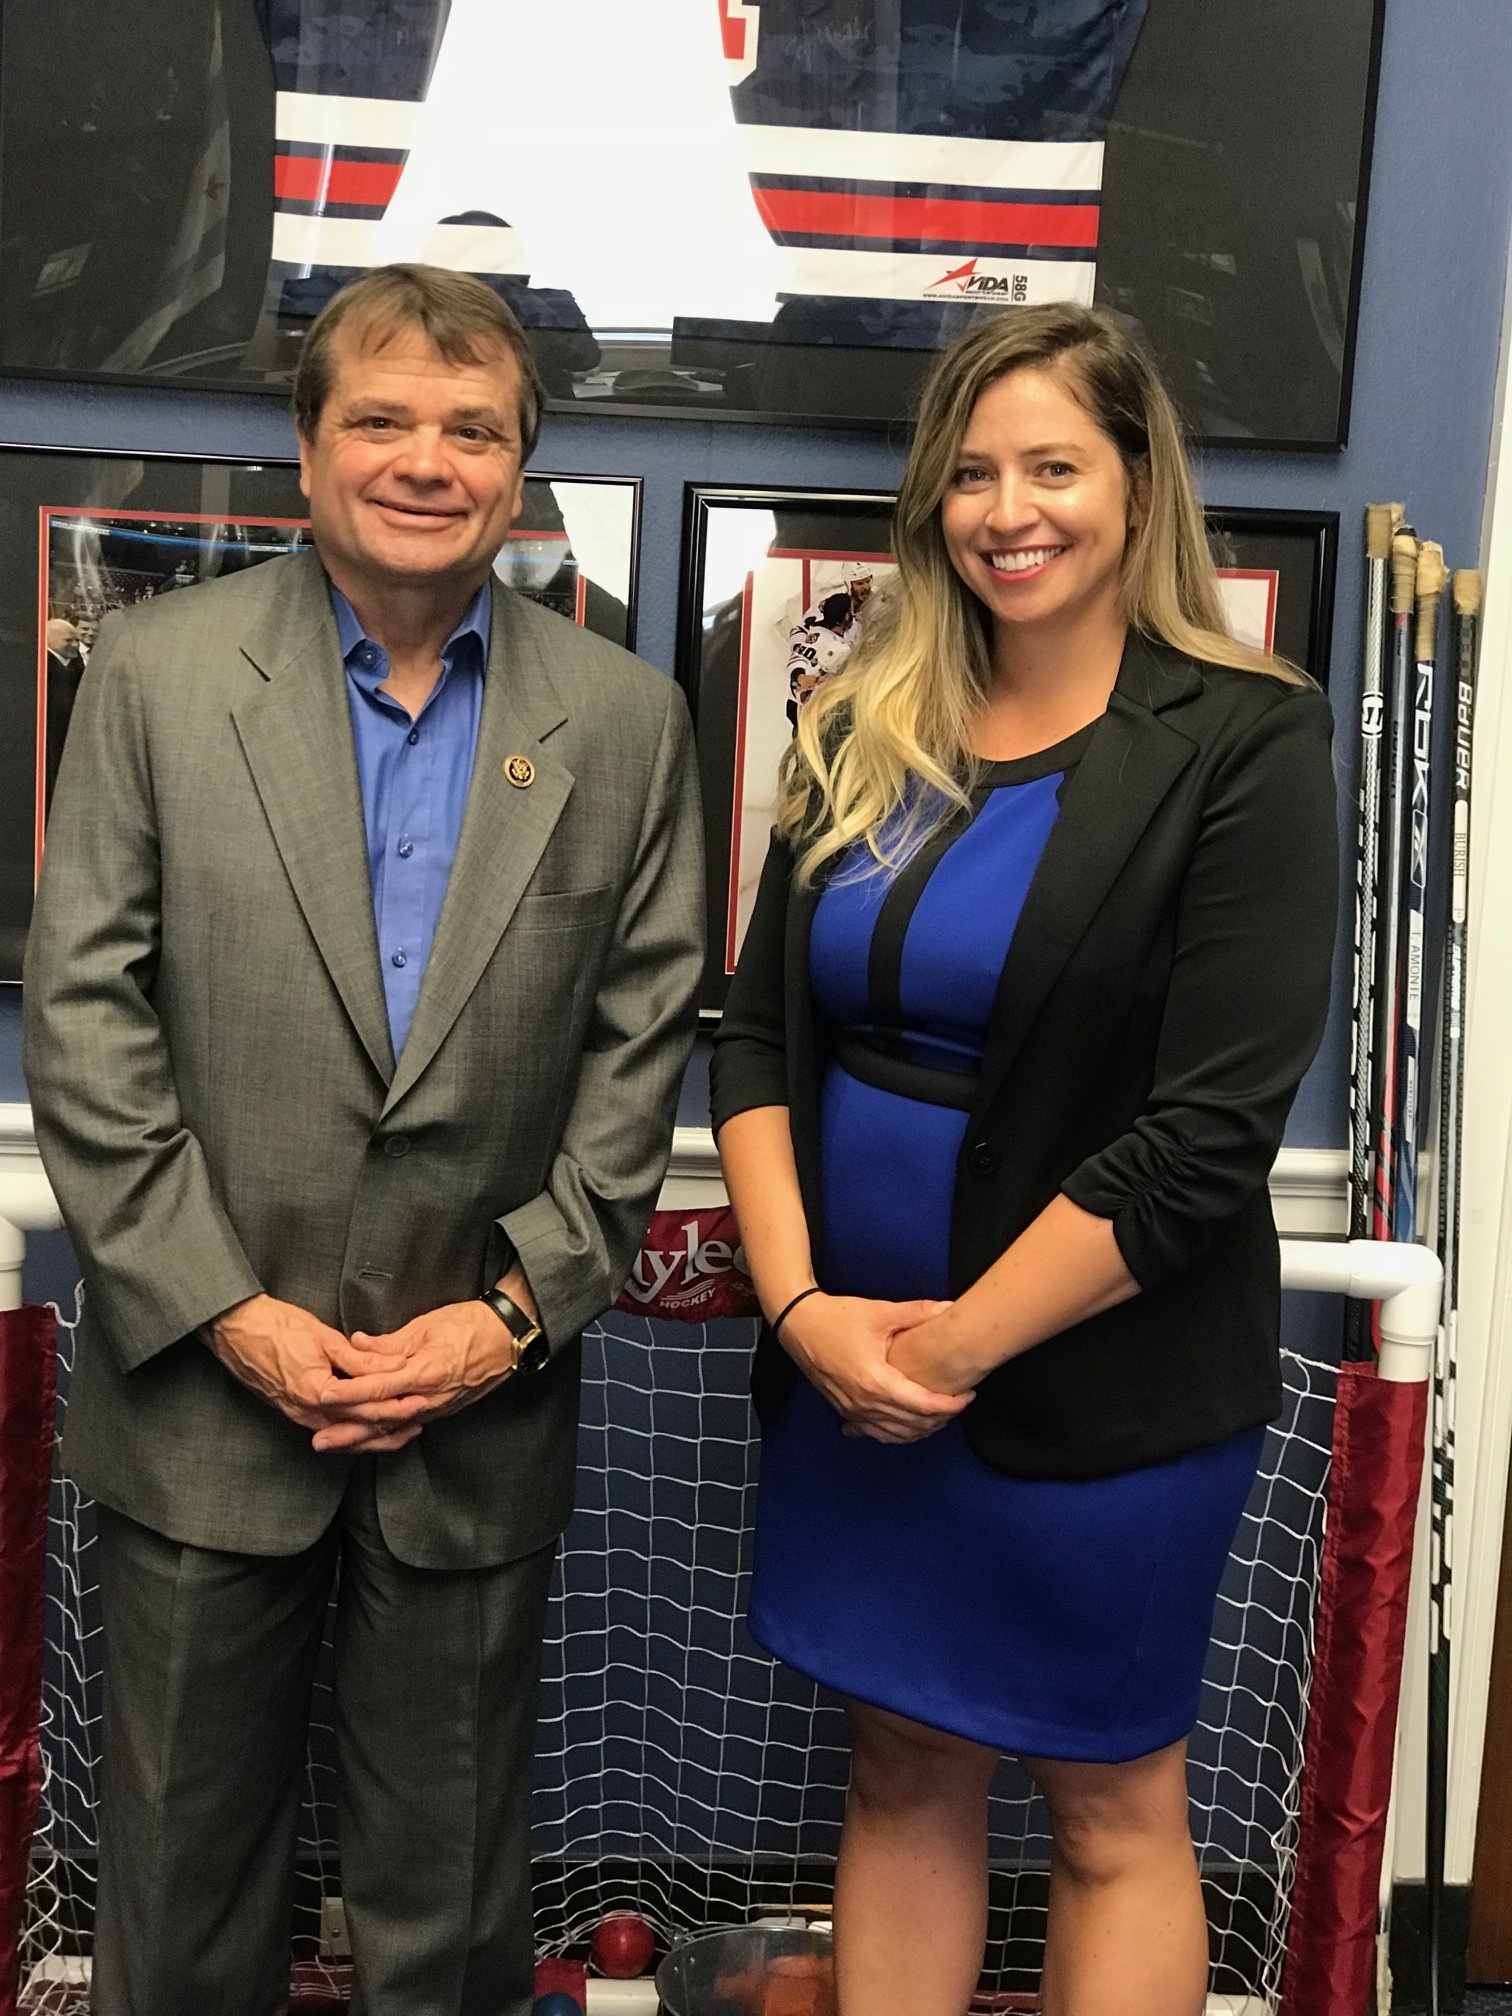 Two adults, standing side-by-side. Rep. Mike Quigley (D - Illinois) and Amazon seller, Kristin Rae. 